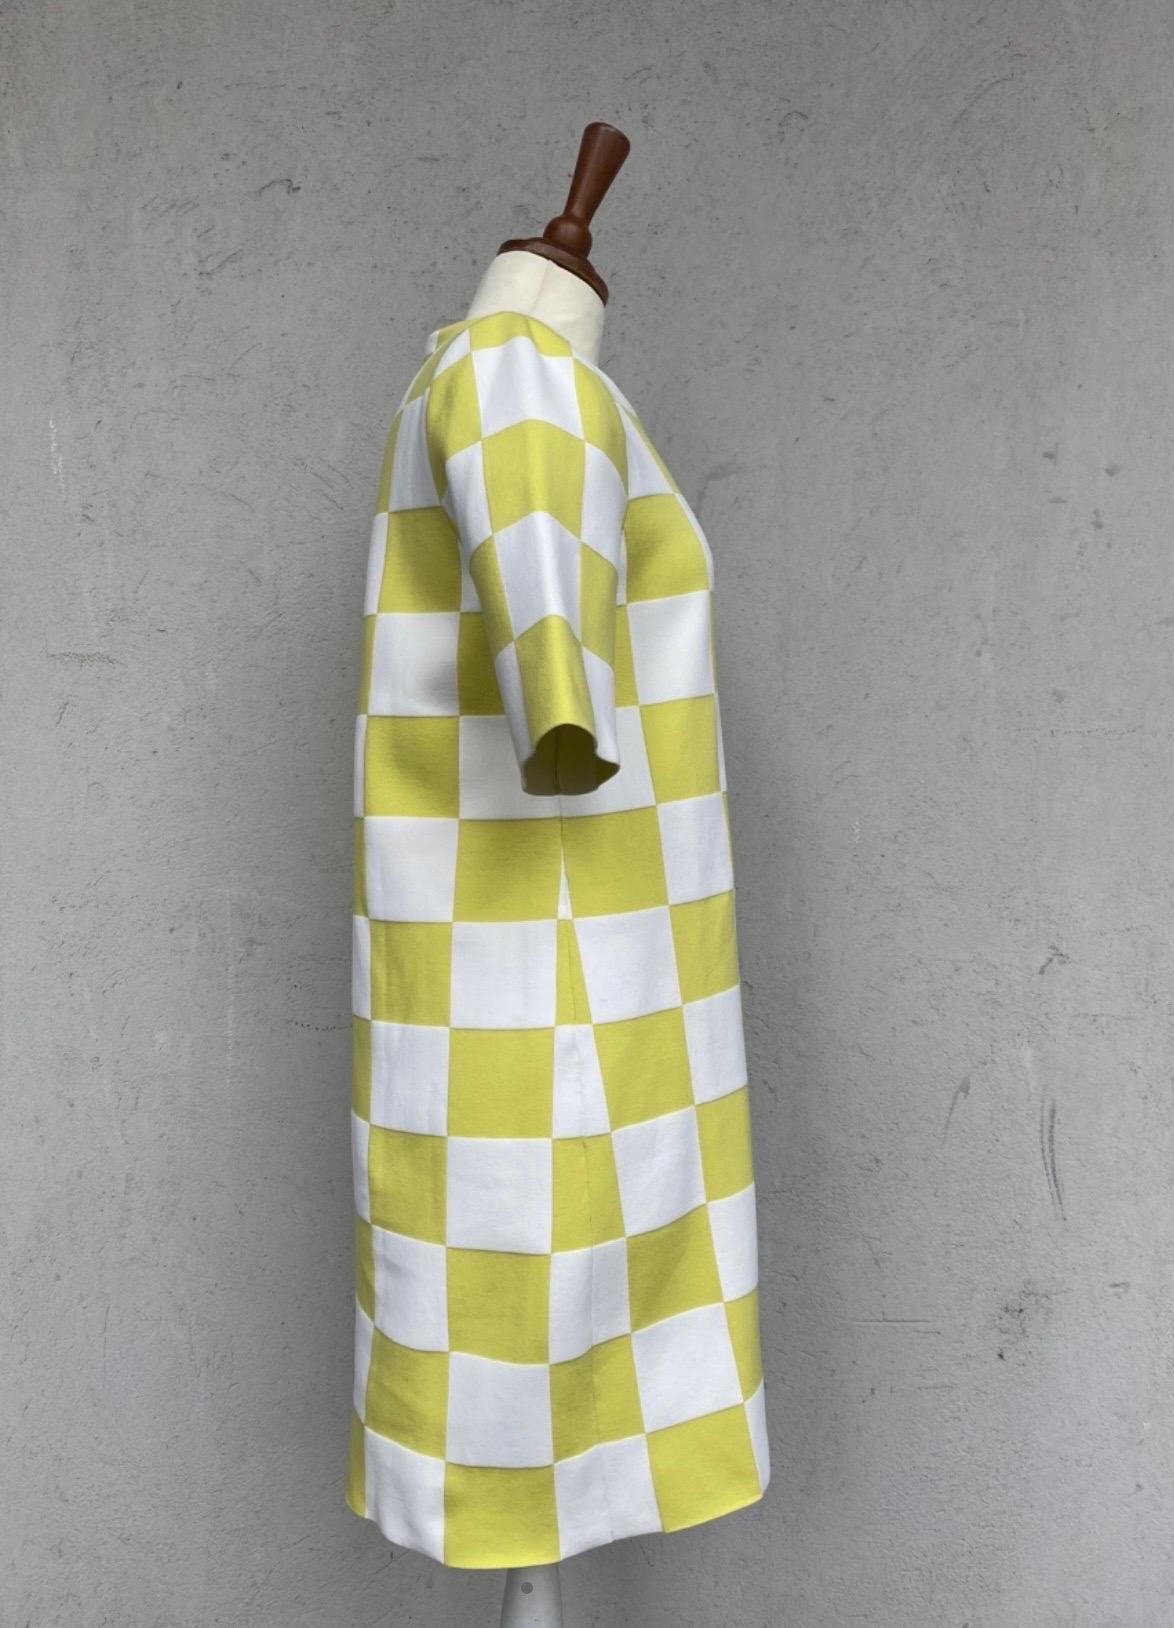 Louis Vuitton midi dress.
SS2013 collection, in mixed material, see label, white and acid yellow checked. size L, measurements: shoulder cm35 length cm82 sleeve cm30 chest cm47 waist cm50.
Excellent condition.